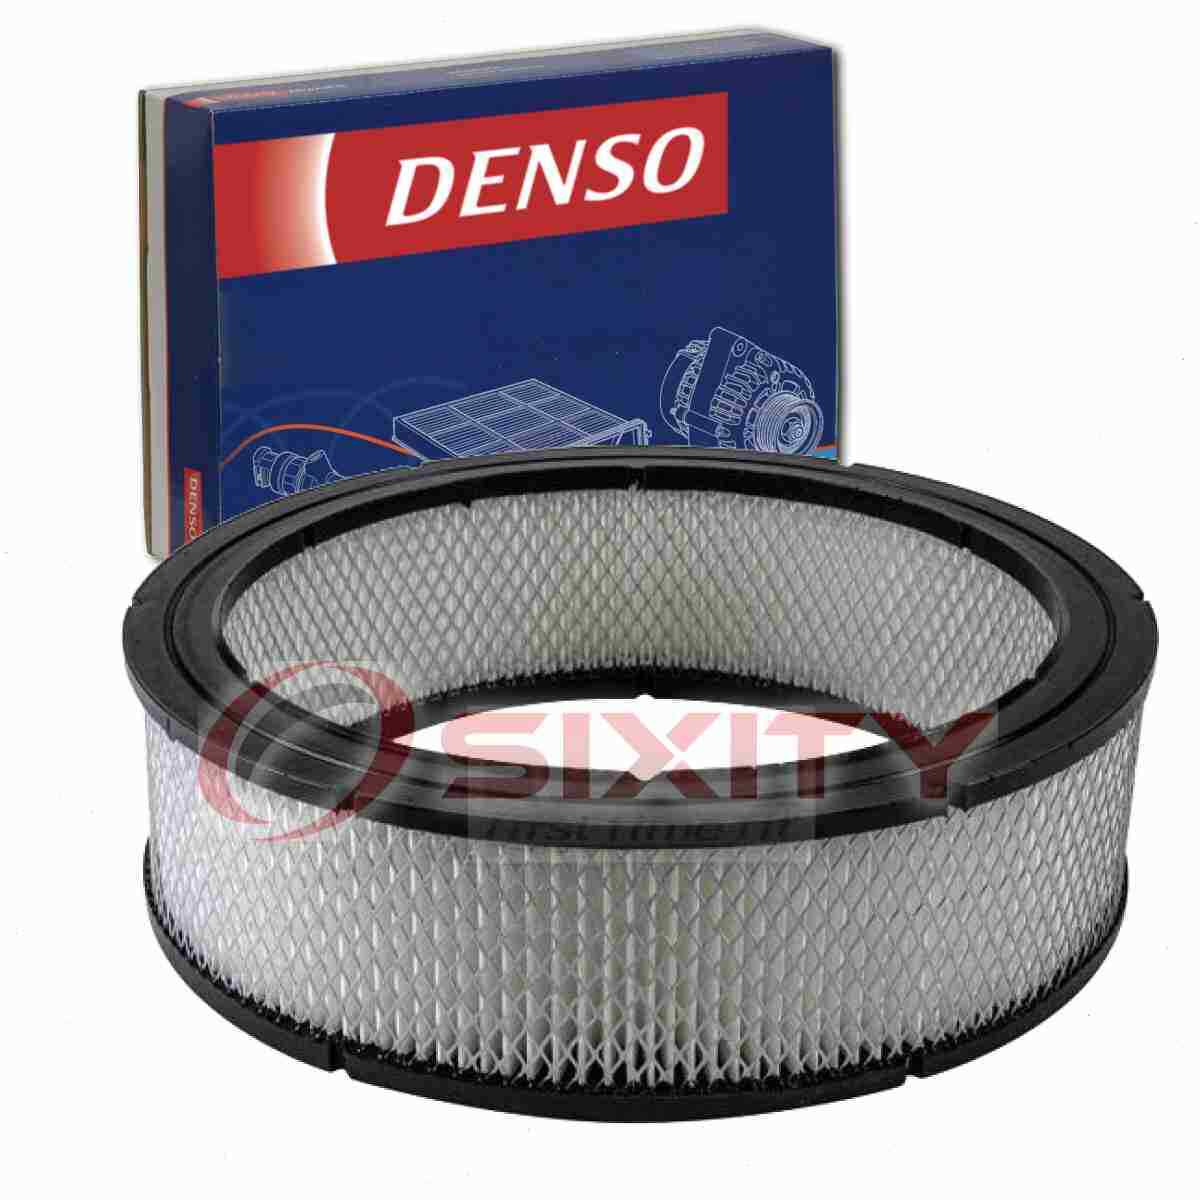 Denso Air Filter for 1980-1987 GMC Caballero 5.0L V8 Intake Inlet Manifold uc